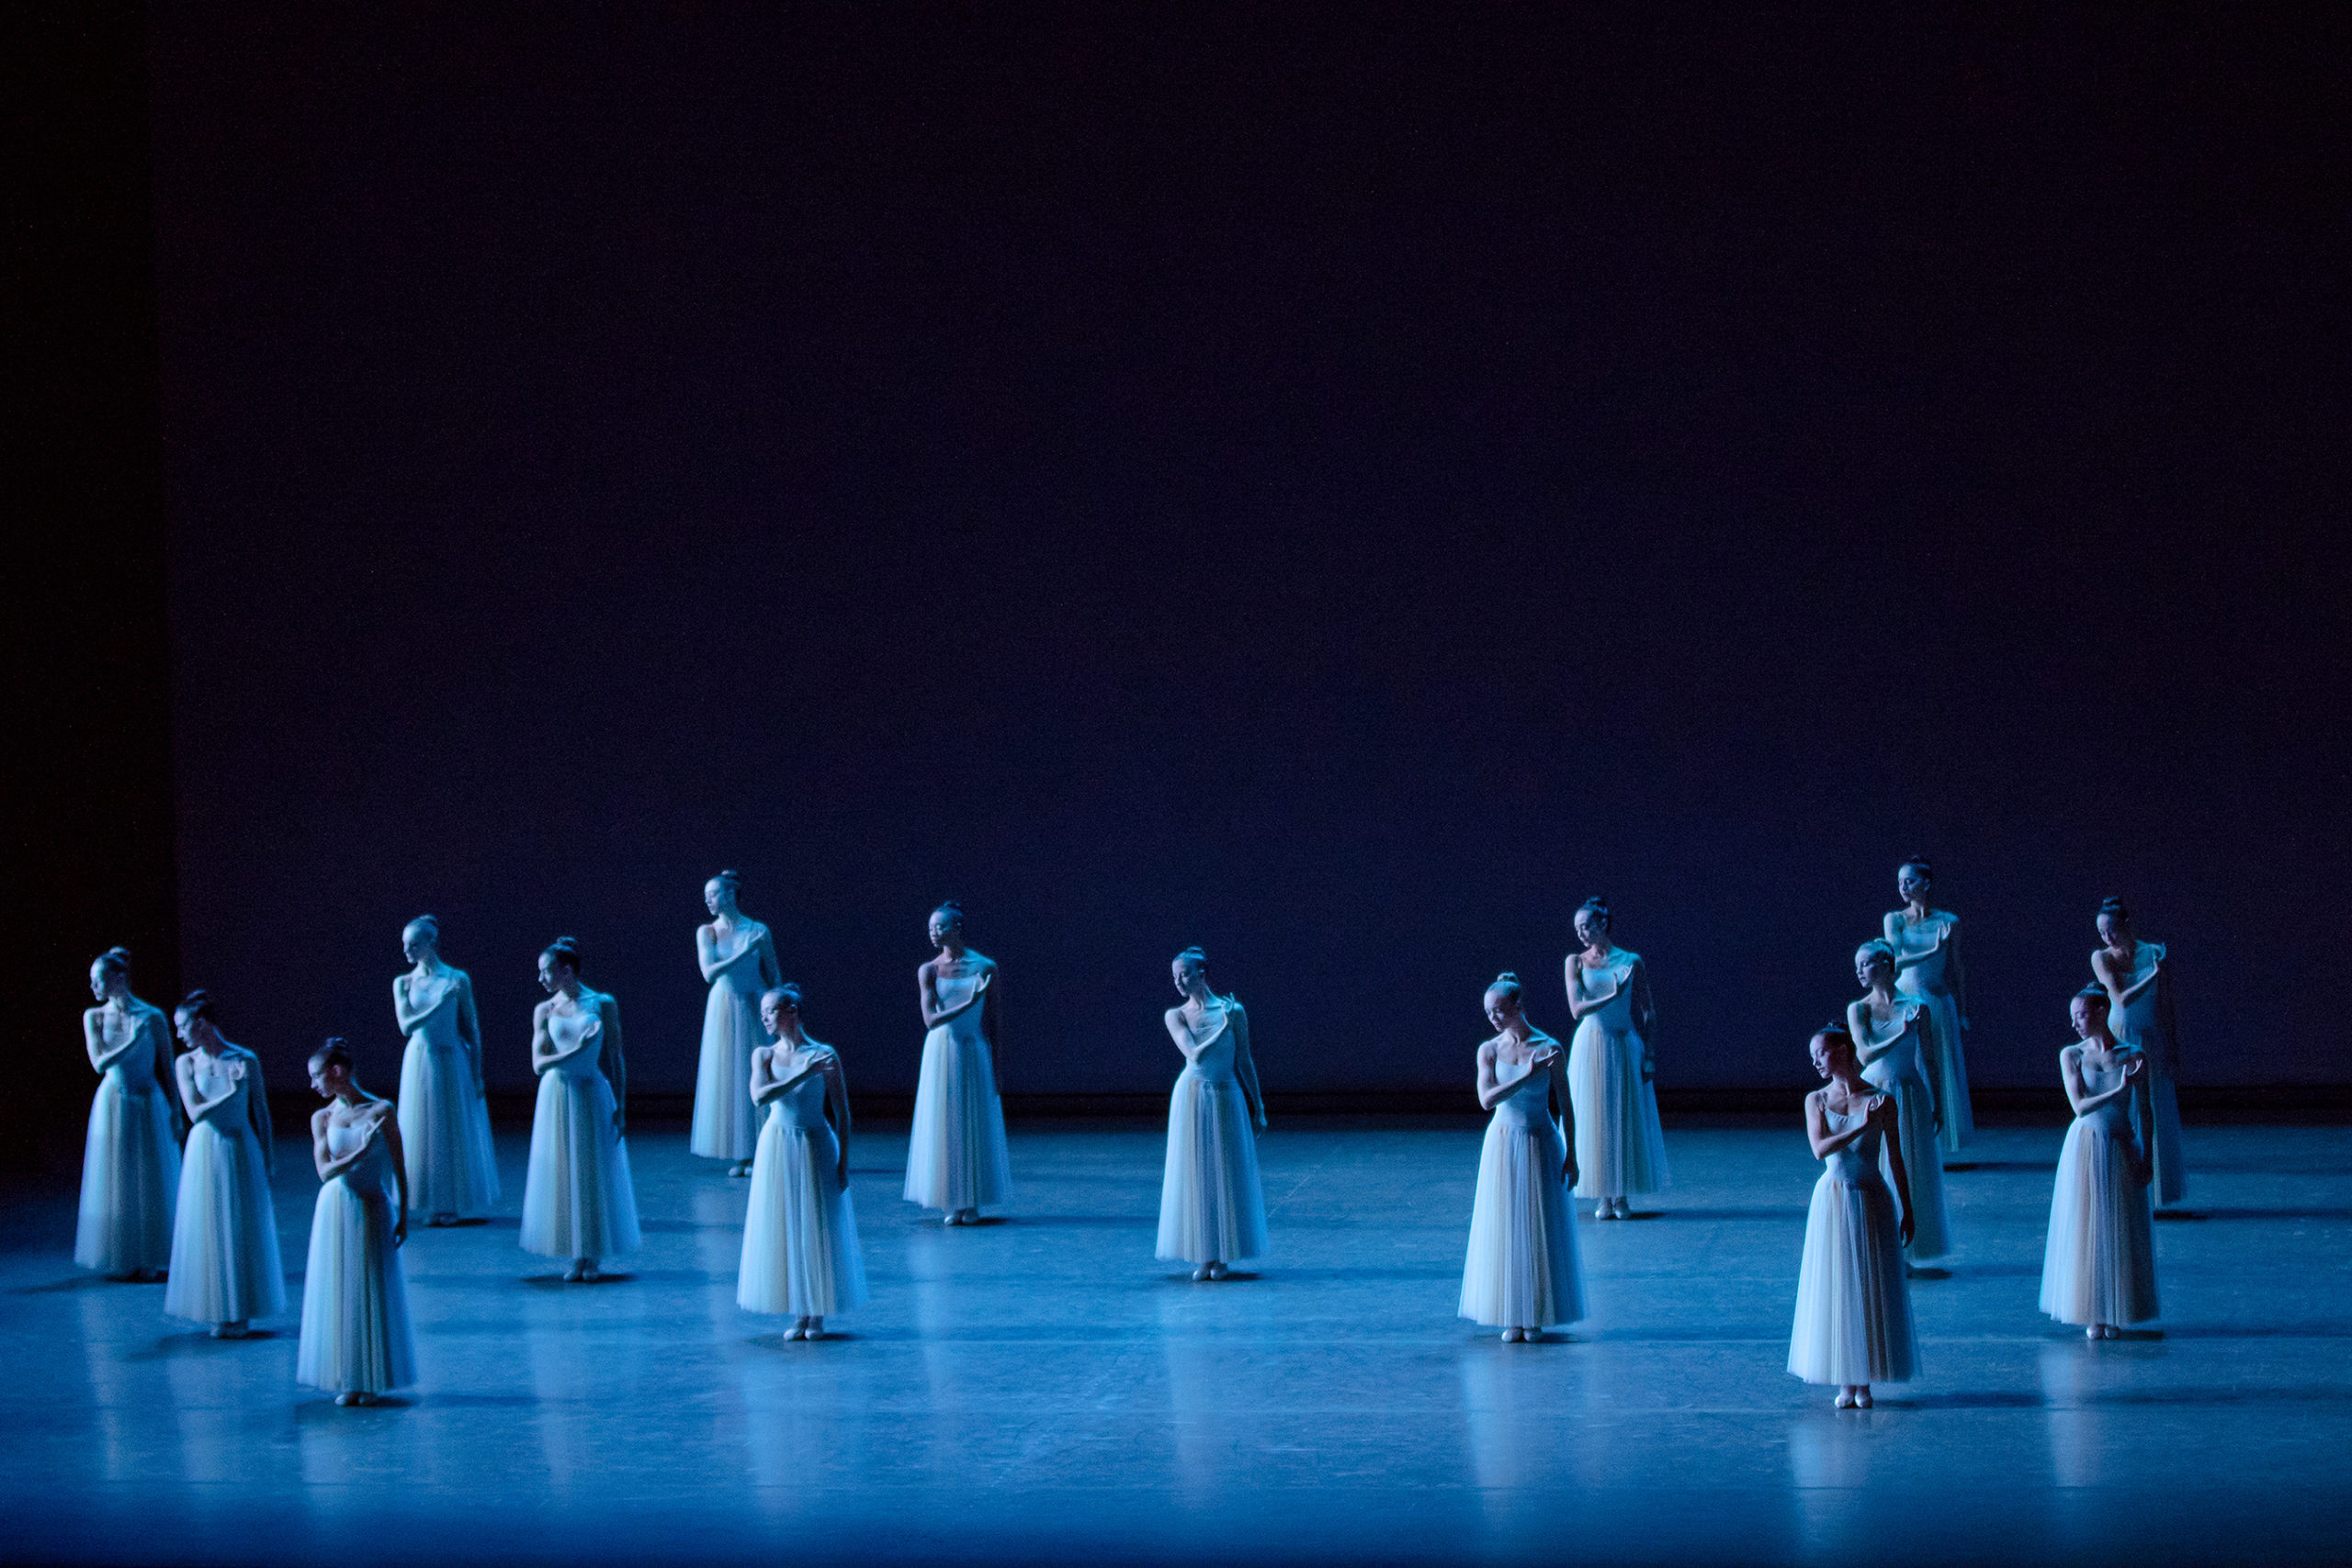 During an onstage performance of the ballet Serenade, 16 female ballet dancers in long, light blue tutus stand in a formation of two diamonds across the stage. They all stand with their feet in parallel, touch their right hand to their left shoulder while their left arm hangs by their side, and look down over their right shoulder.